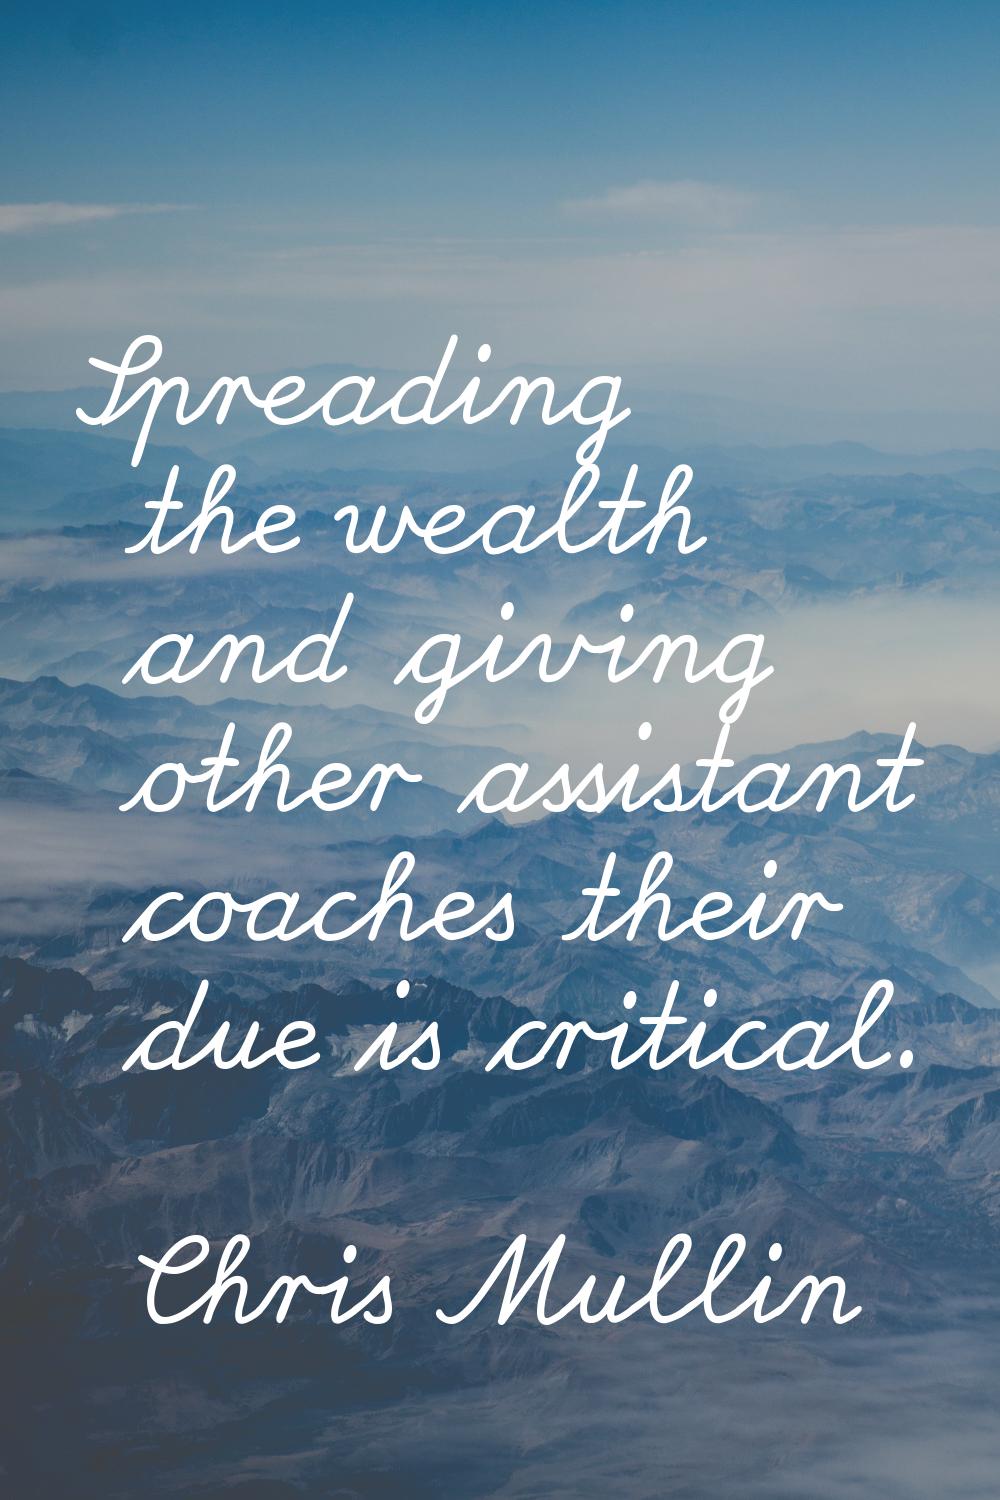 Spreading the wealth and giving other assistant coaches their due is critical.